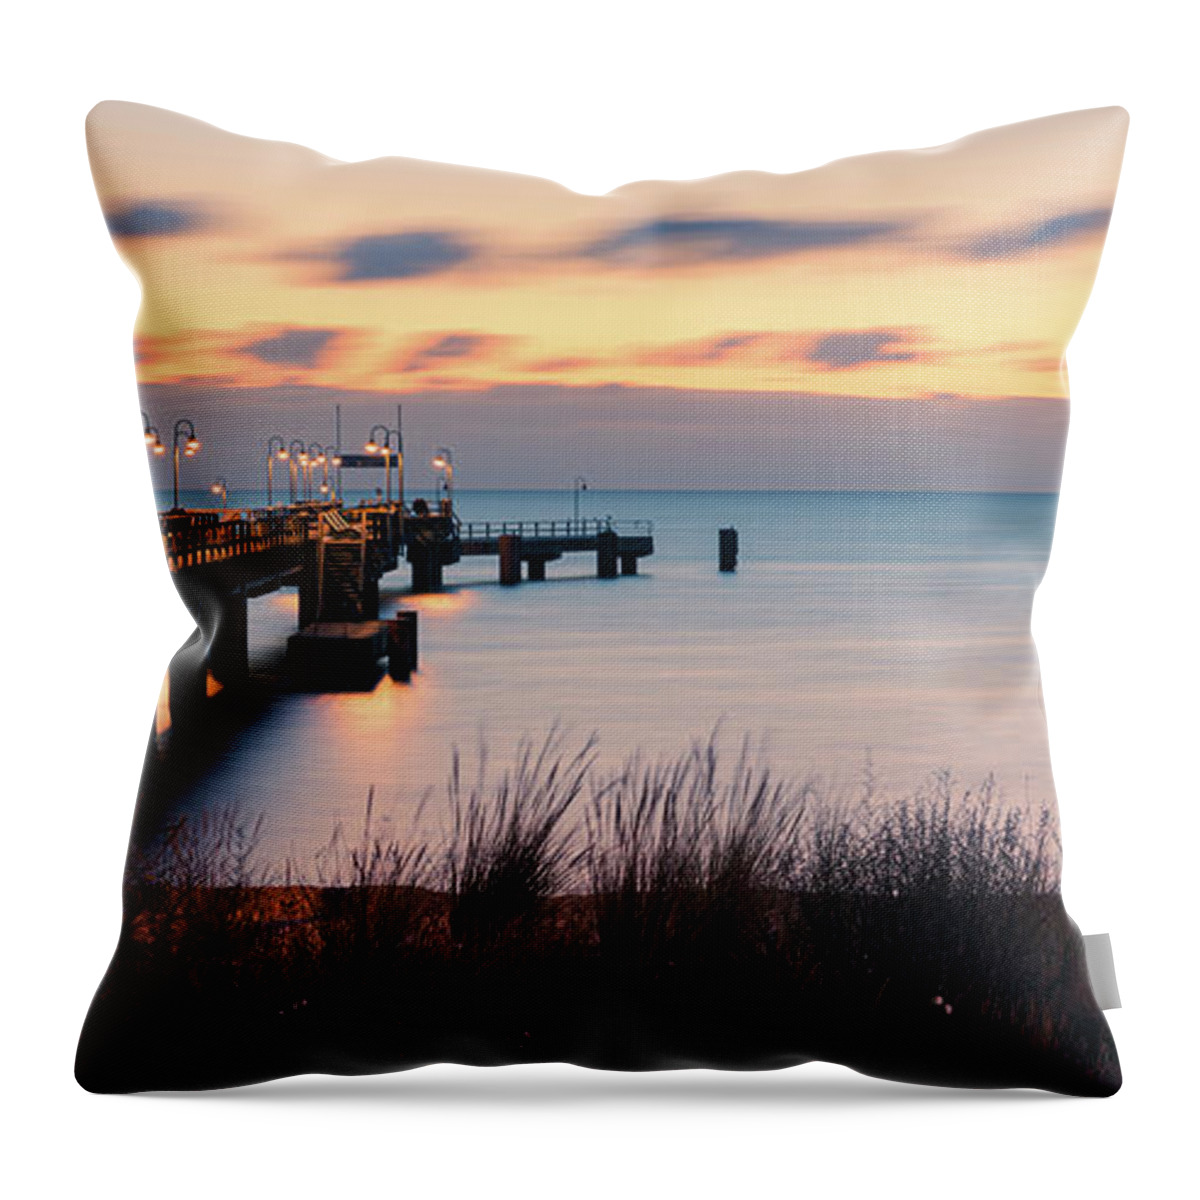 Gohren Throw Pillow featuring the photograph Sunrise at Gohren on Rugen Island 1 by Henk Meijer Photography